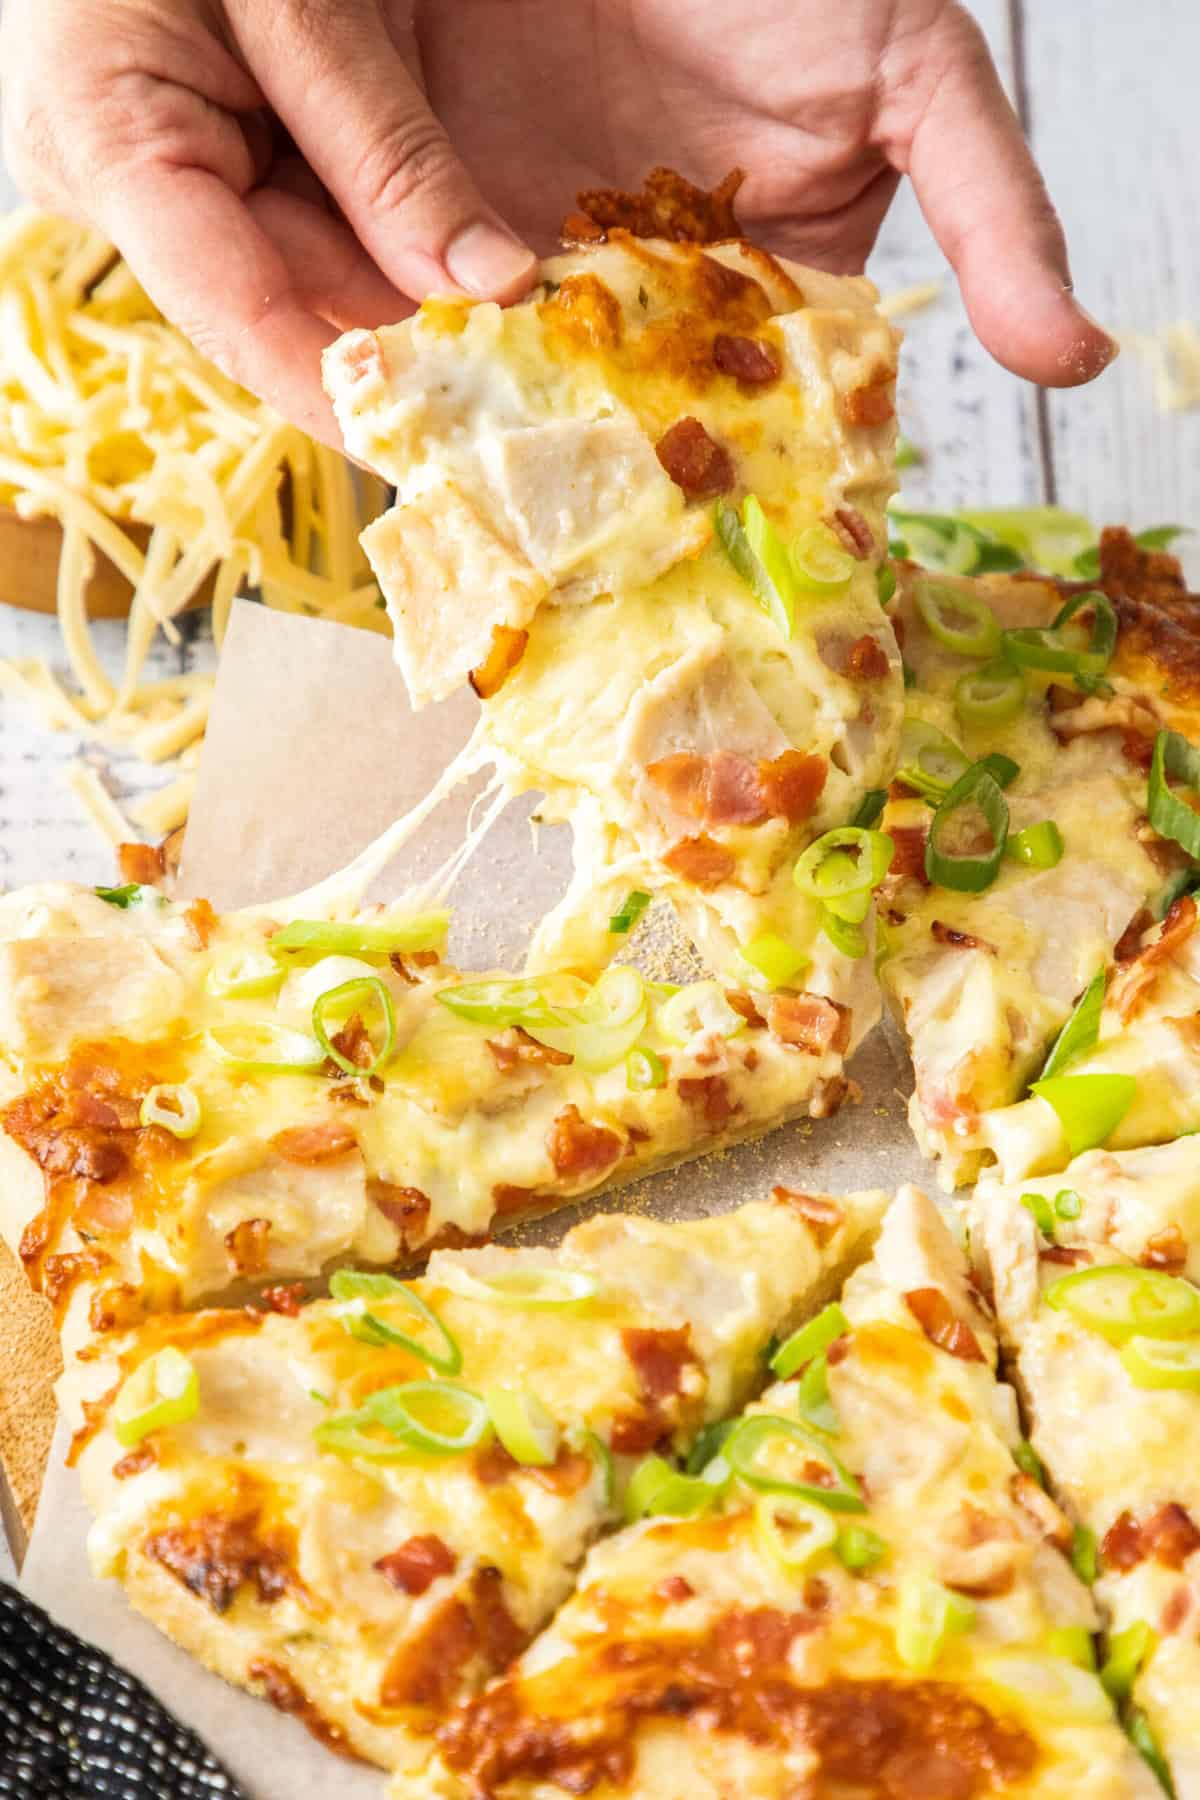 a hand holding a slice of pizza topped with scallions.